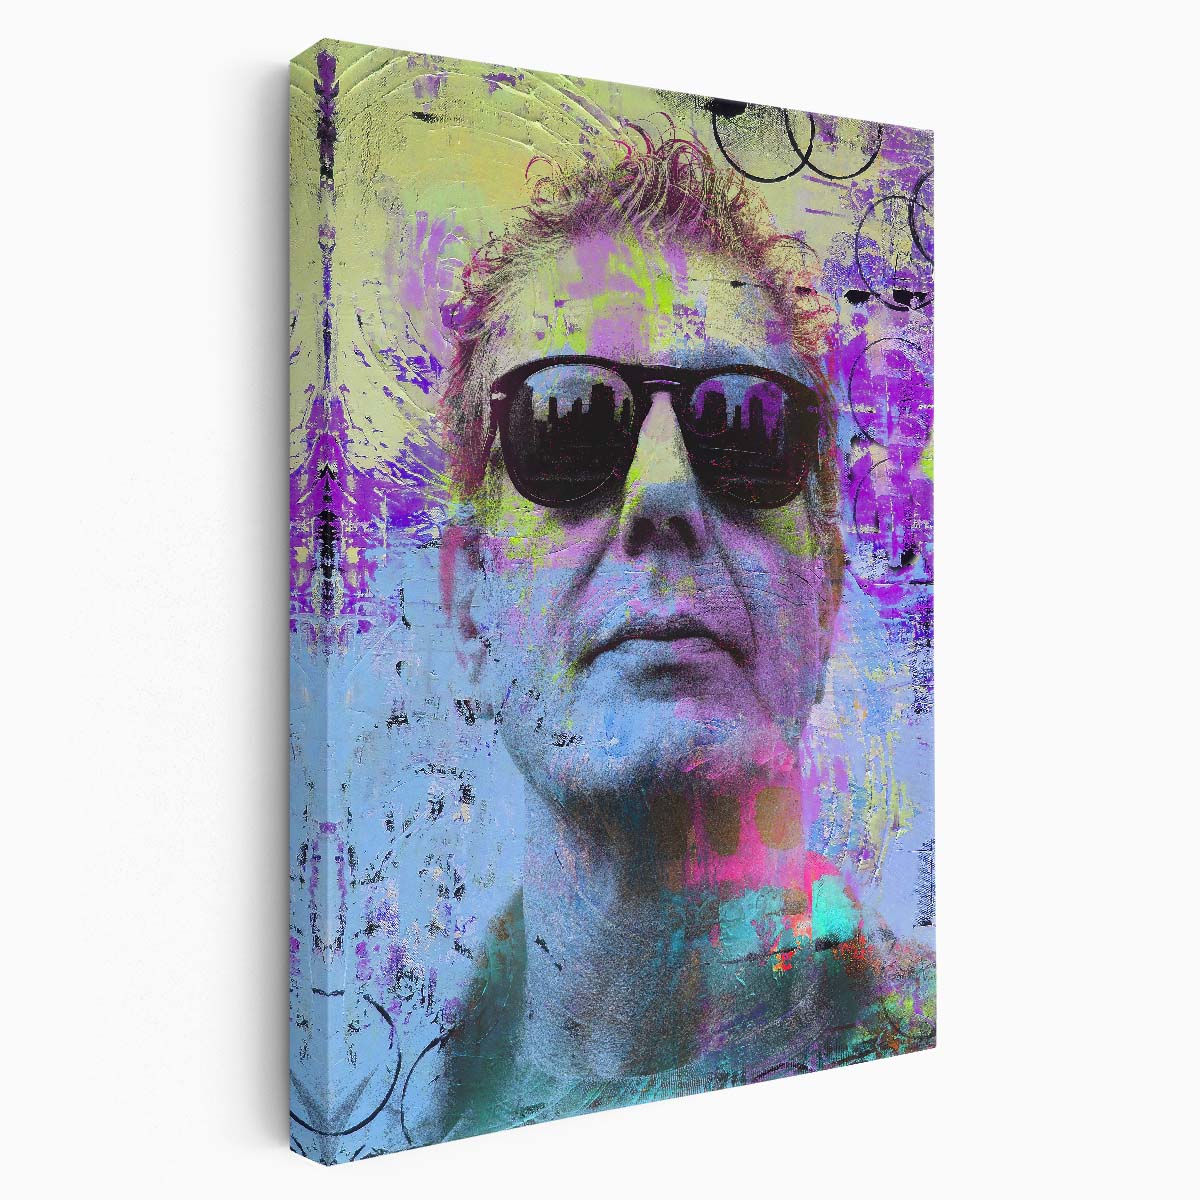 Anthony Bourdain Portrait Wall Art by Luxuriance Designs. Made in USA.